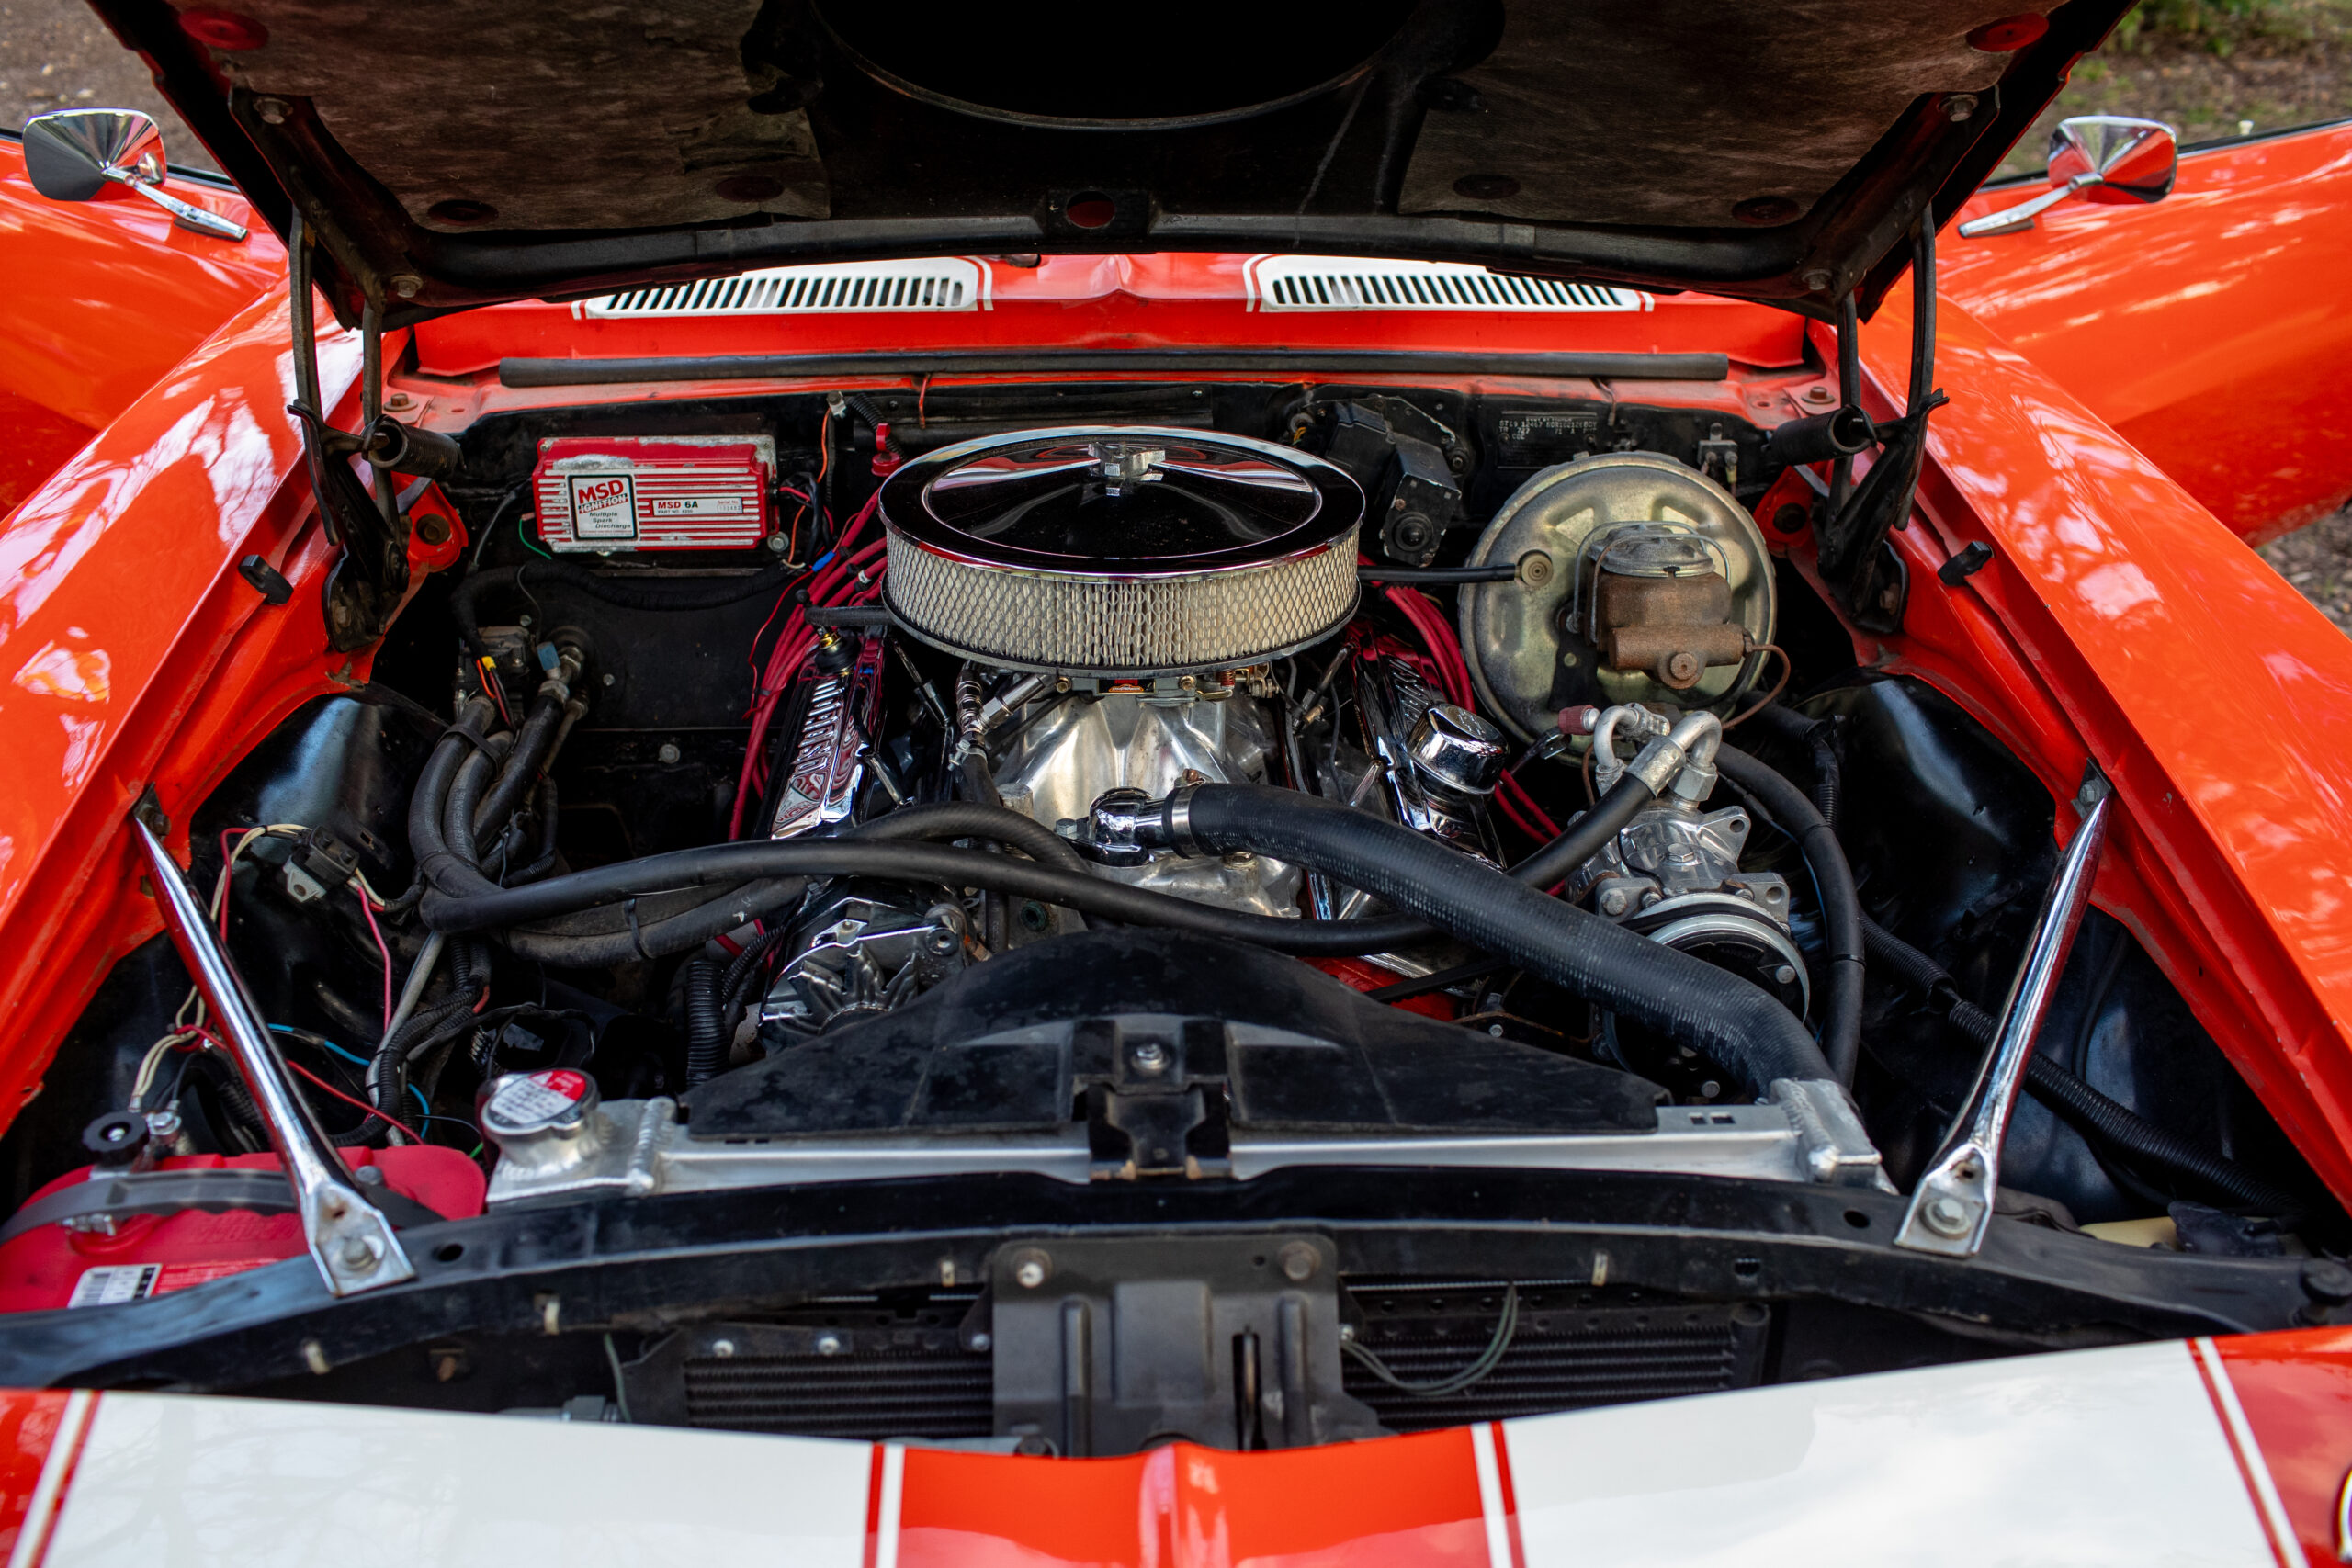 View of an open car hood revealing a clean, well-maintained engine with various components, wires, and a filter, in a red vehicle.